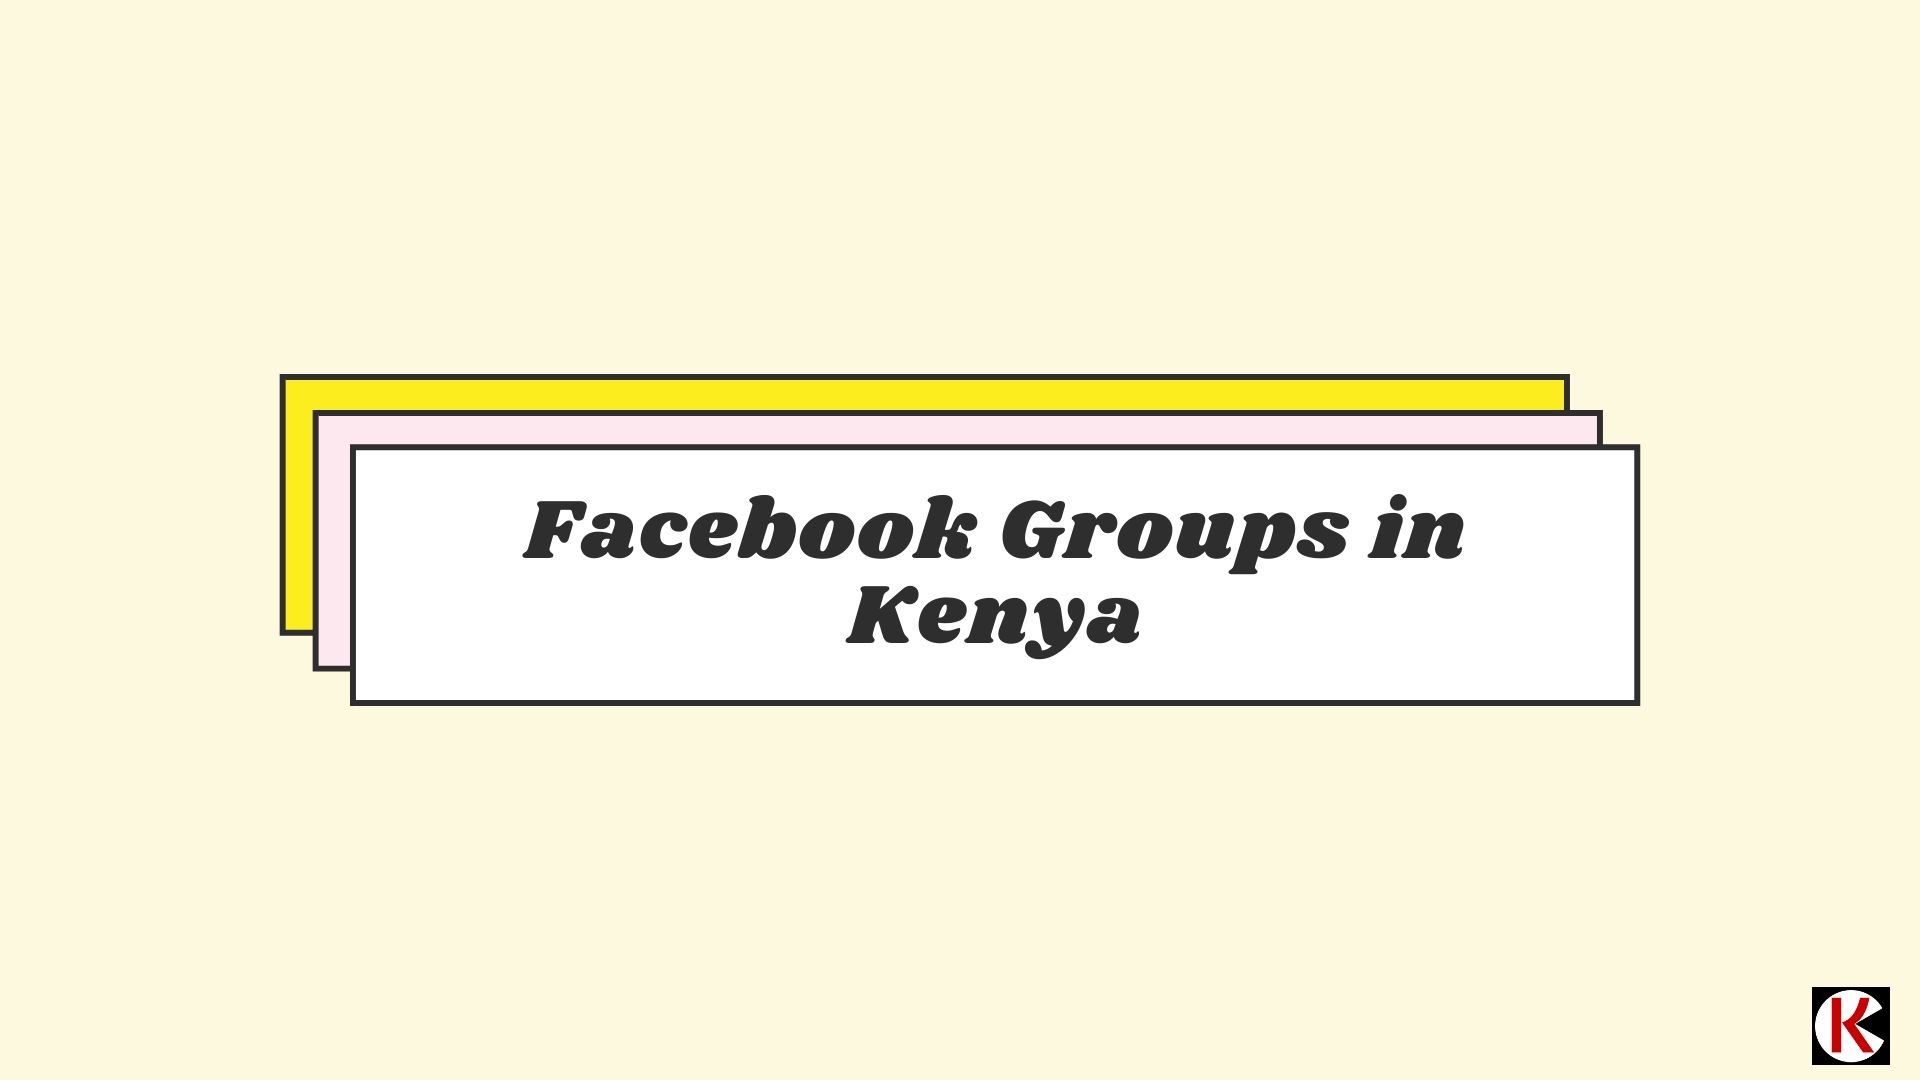 List of Leading Facebook groups to market your products in Kenya